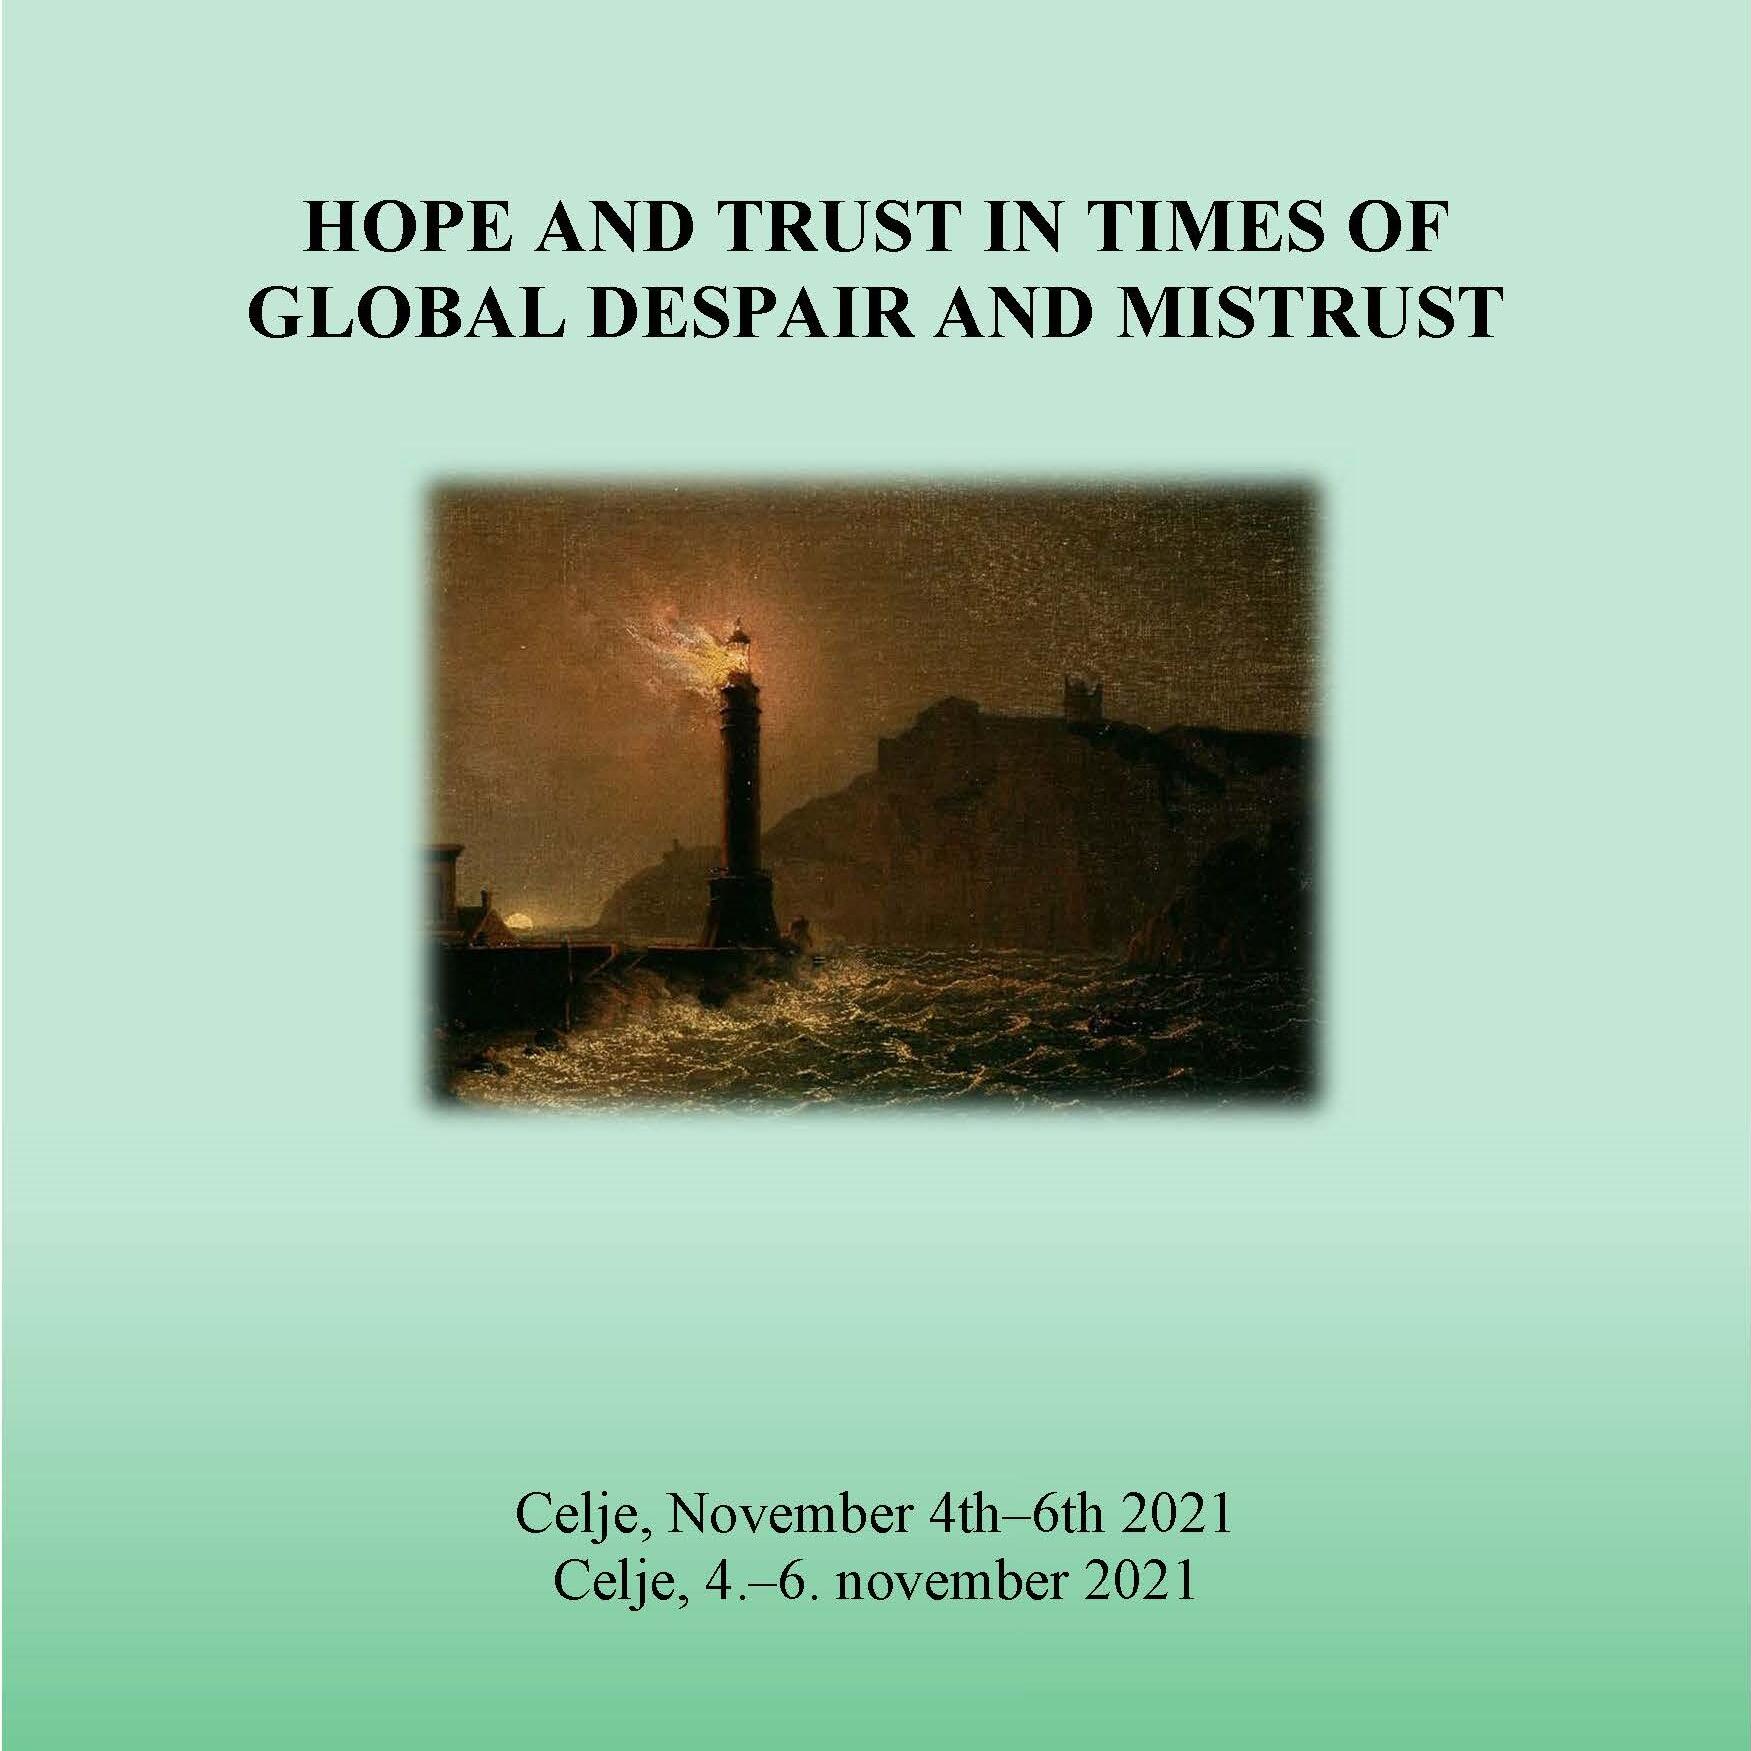 “Hope and Trust in Times of Global Despair and Mistrust”